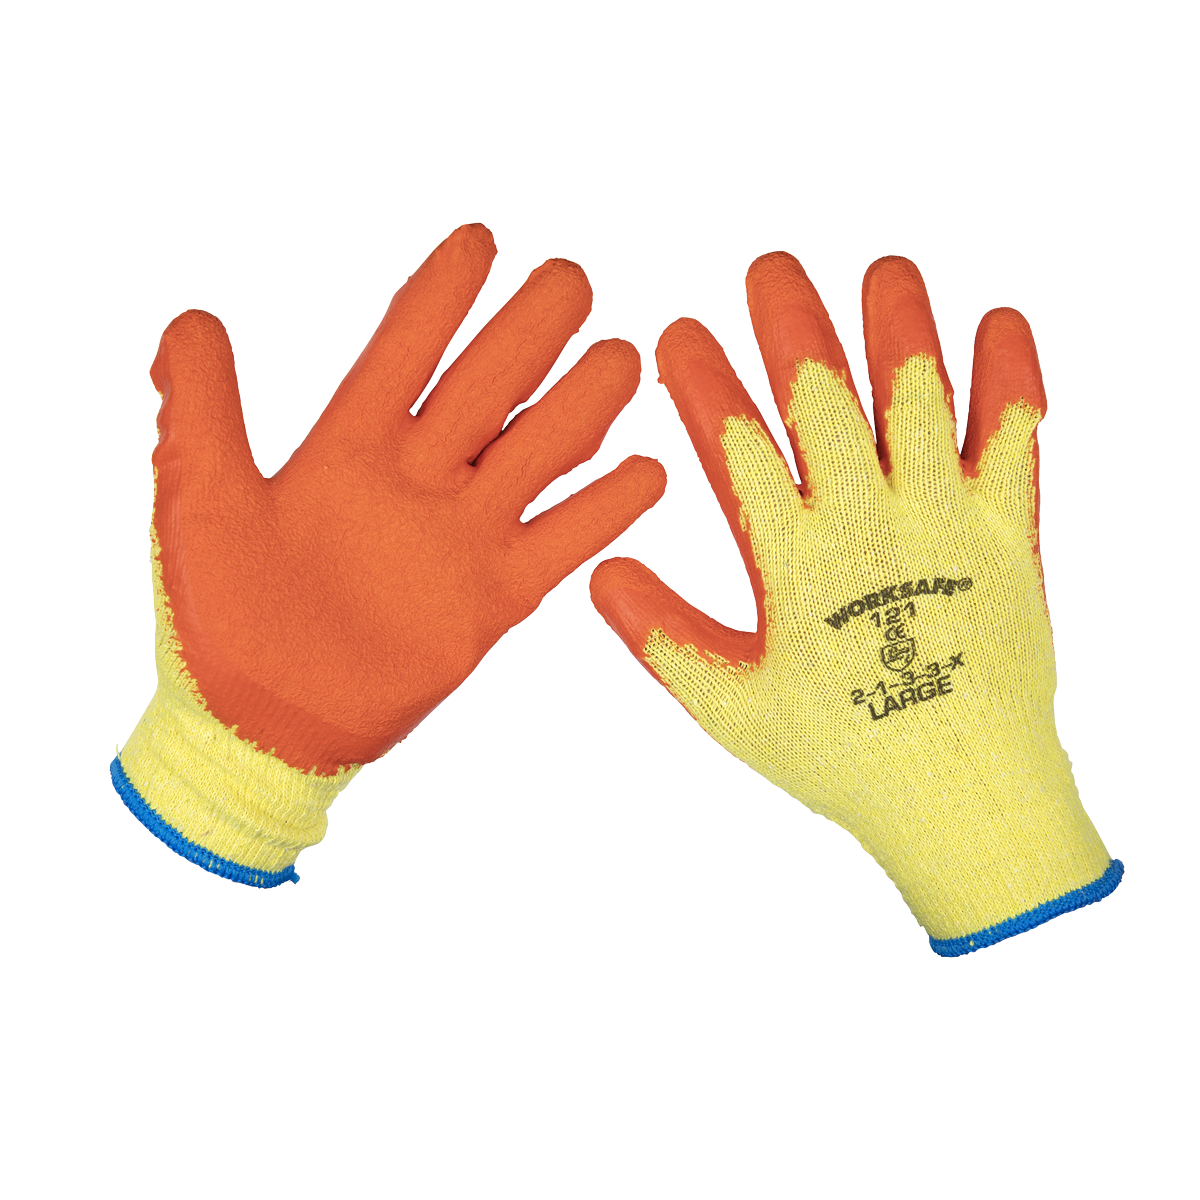 Super Grip Knitted Gloves Latex Palm (Large) - Pack of 6 Pairs - TSP121L/6 - Farming Parts